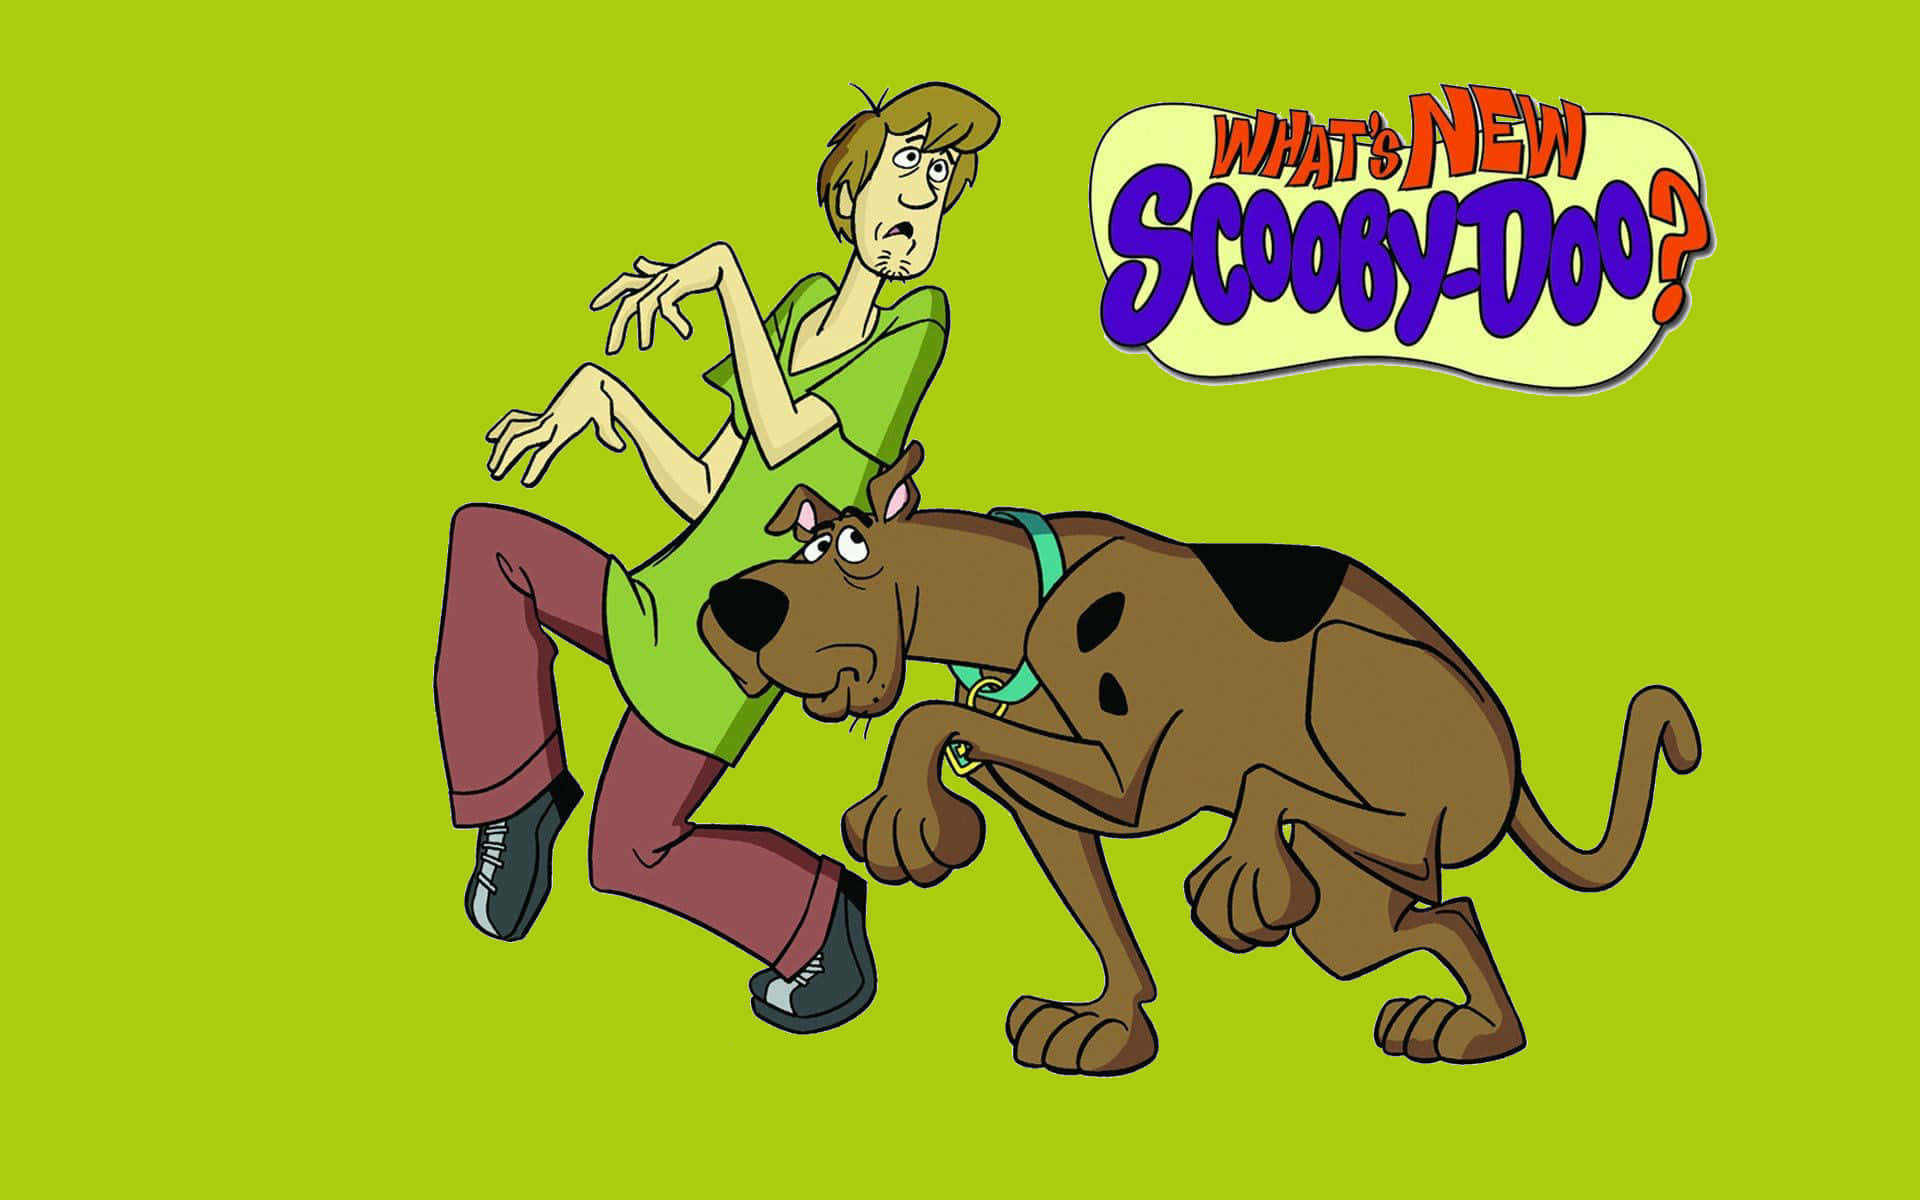 Scooby Doo and the gang solve a new mystery!